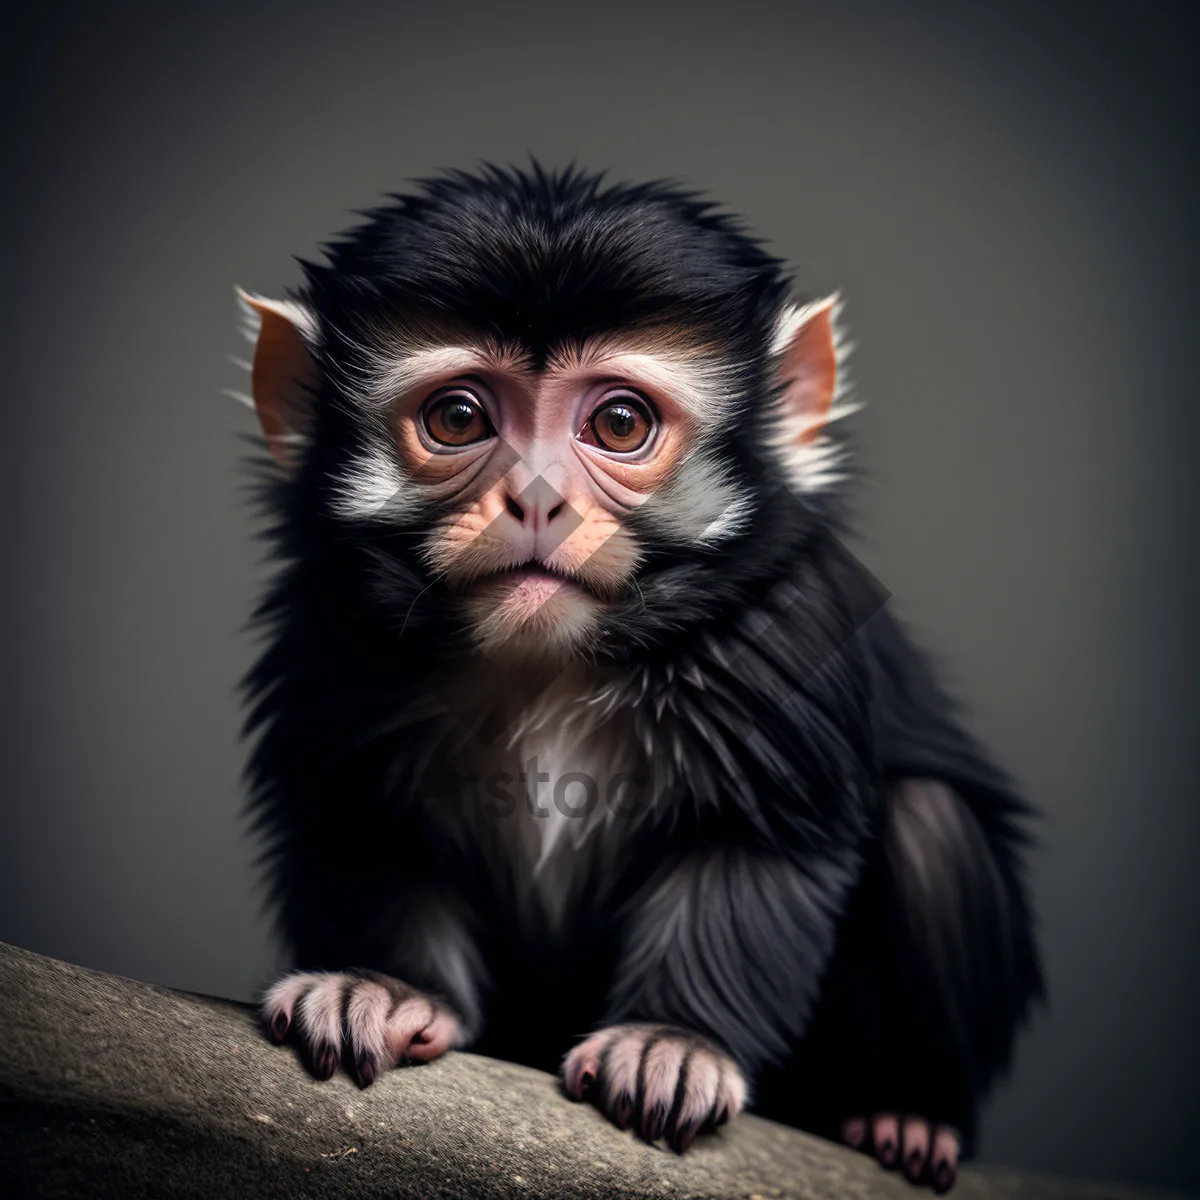 Picture of Cute Baby Monkey Portrait with Playful Expressions